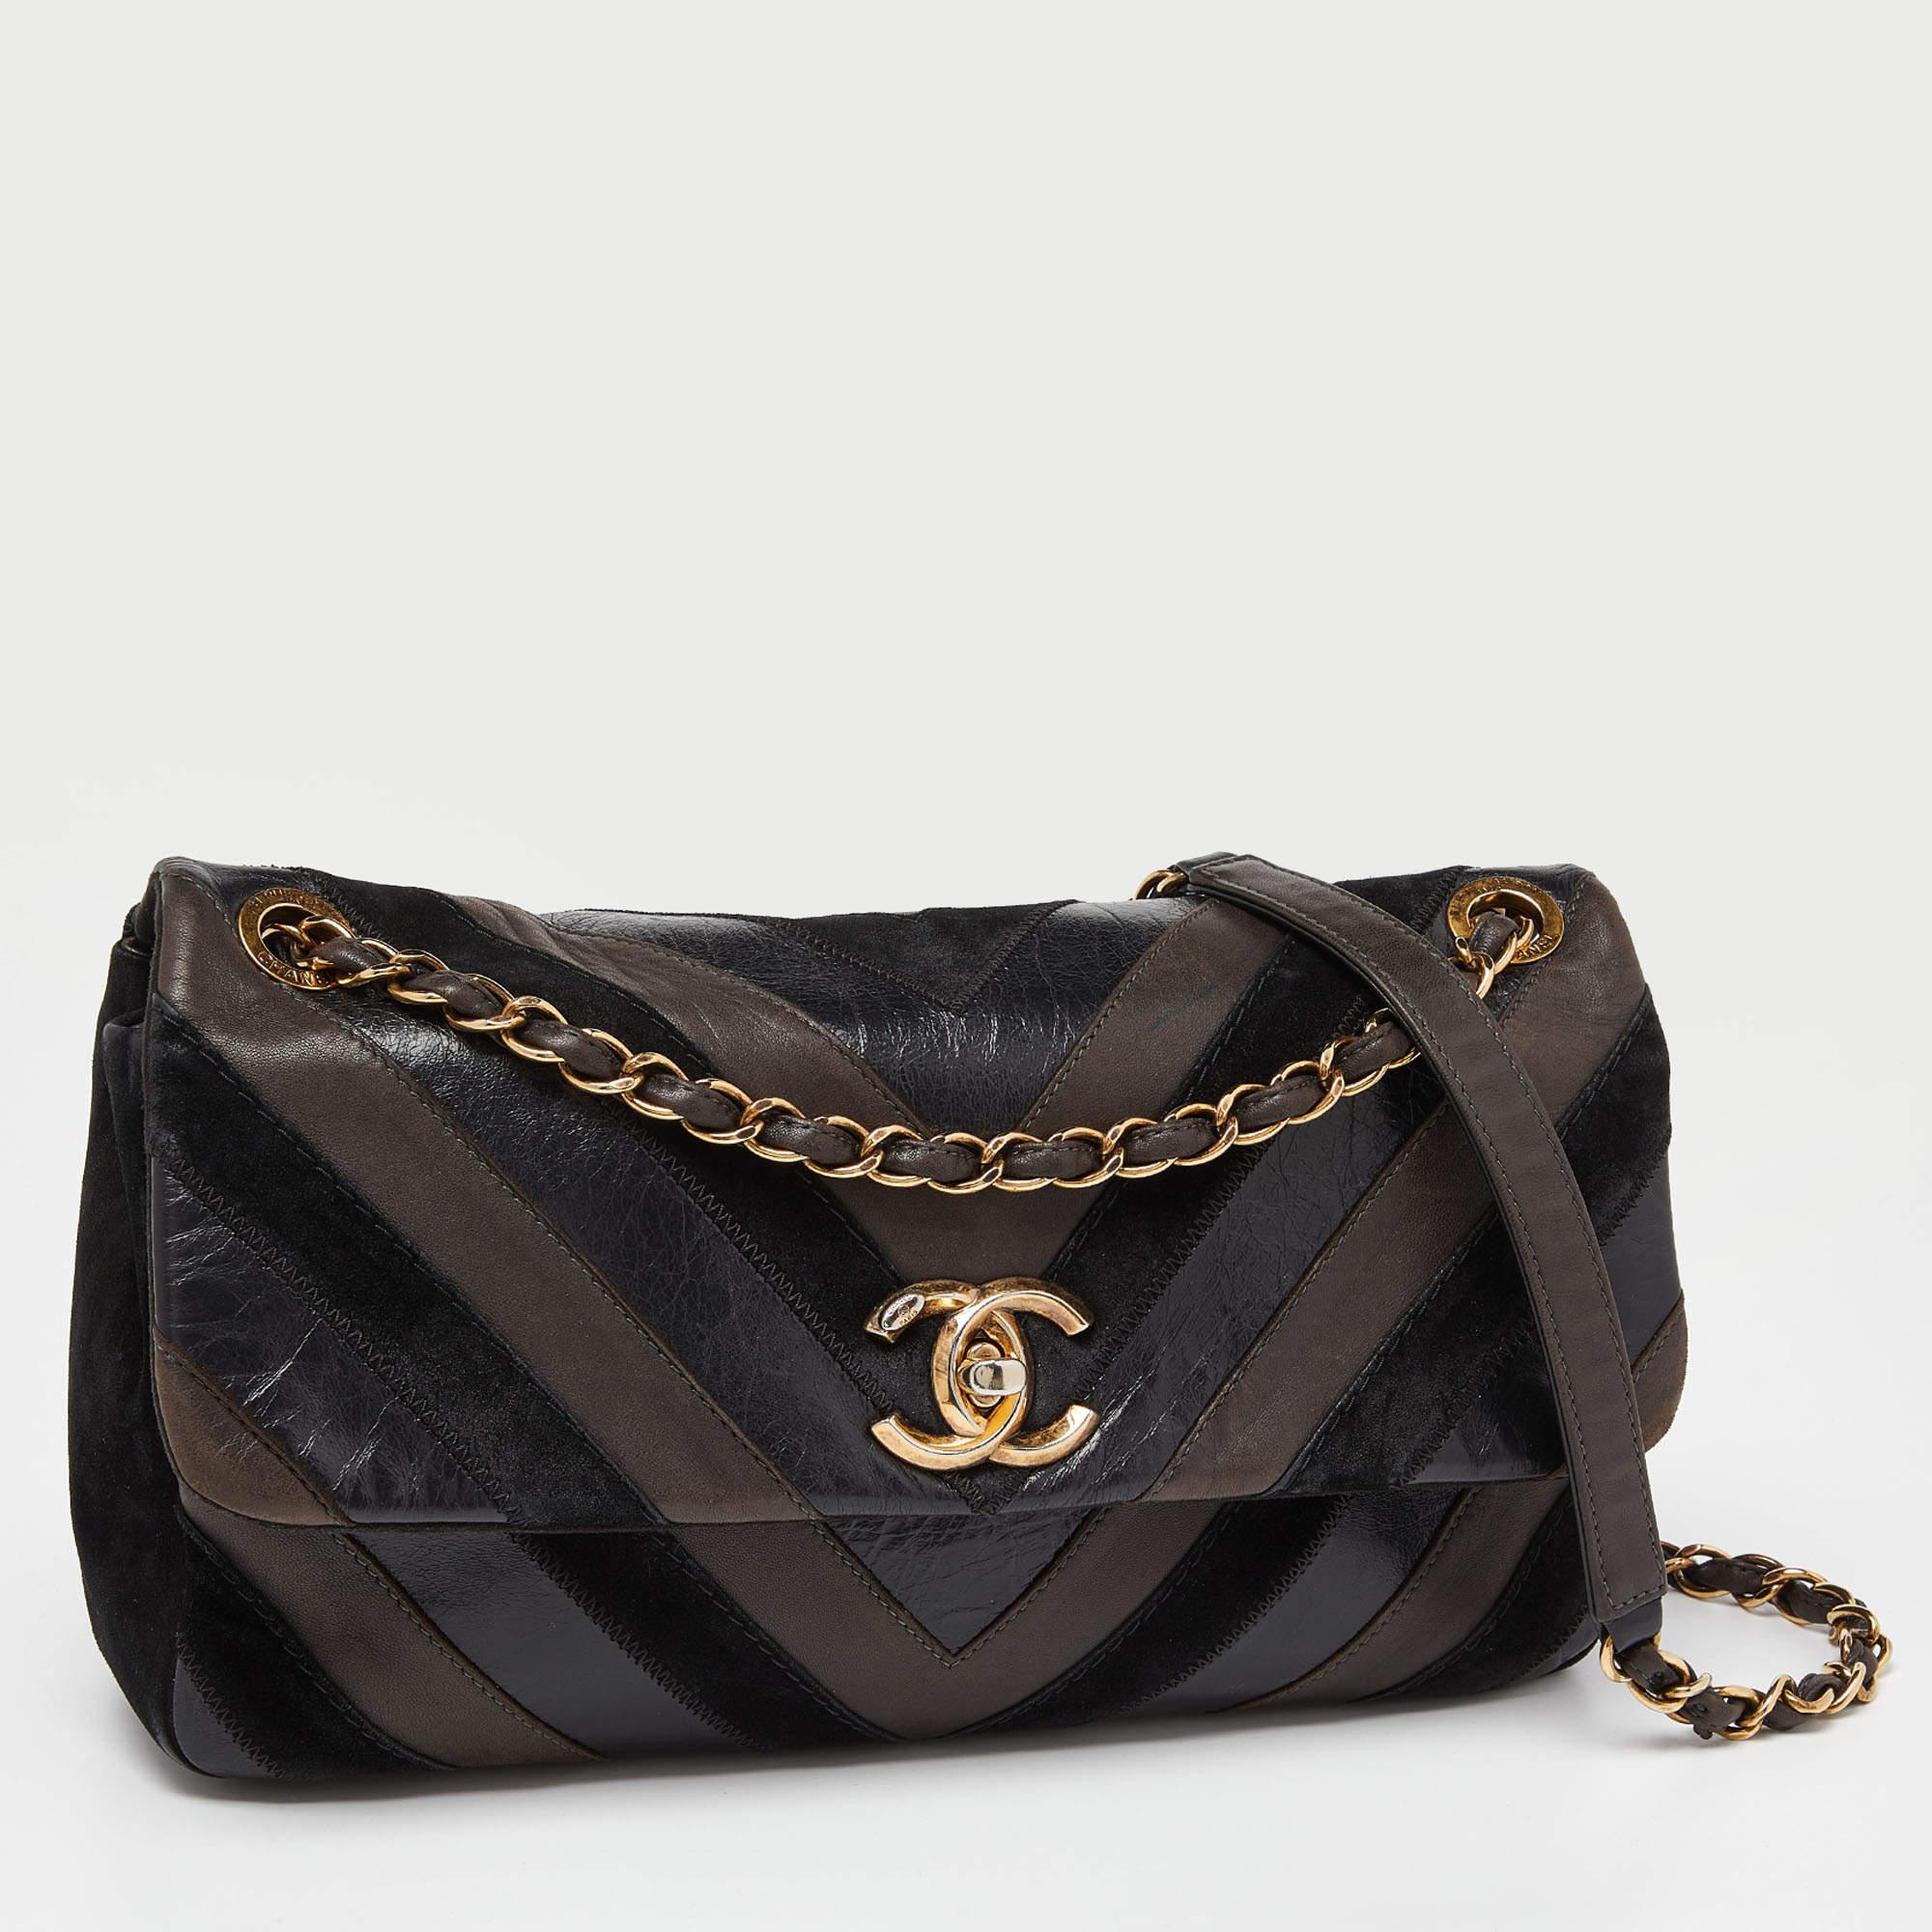 This flap bag from Chanel exemplifies the brand's signature aesthetics in a practical way. Expertly crafted using suede & leather and accentuated with the CC logo lock, this fabulous bag has a lined interior to keep all your essentials safe.

